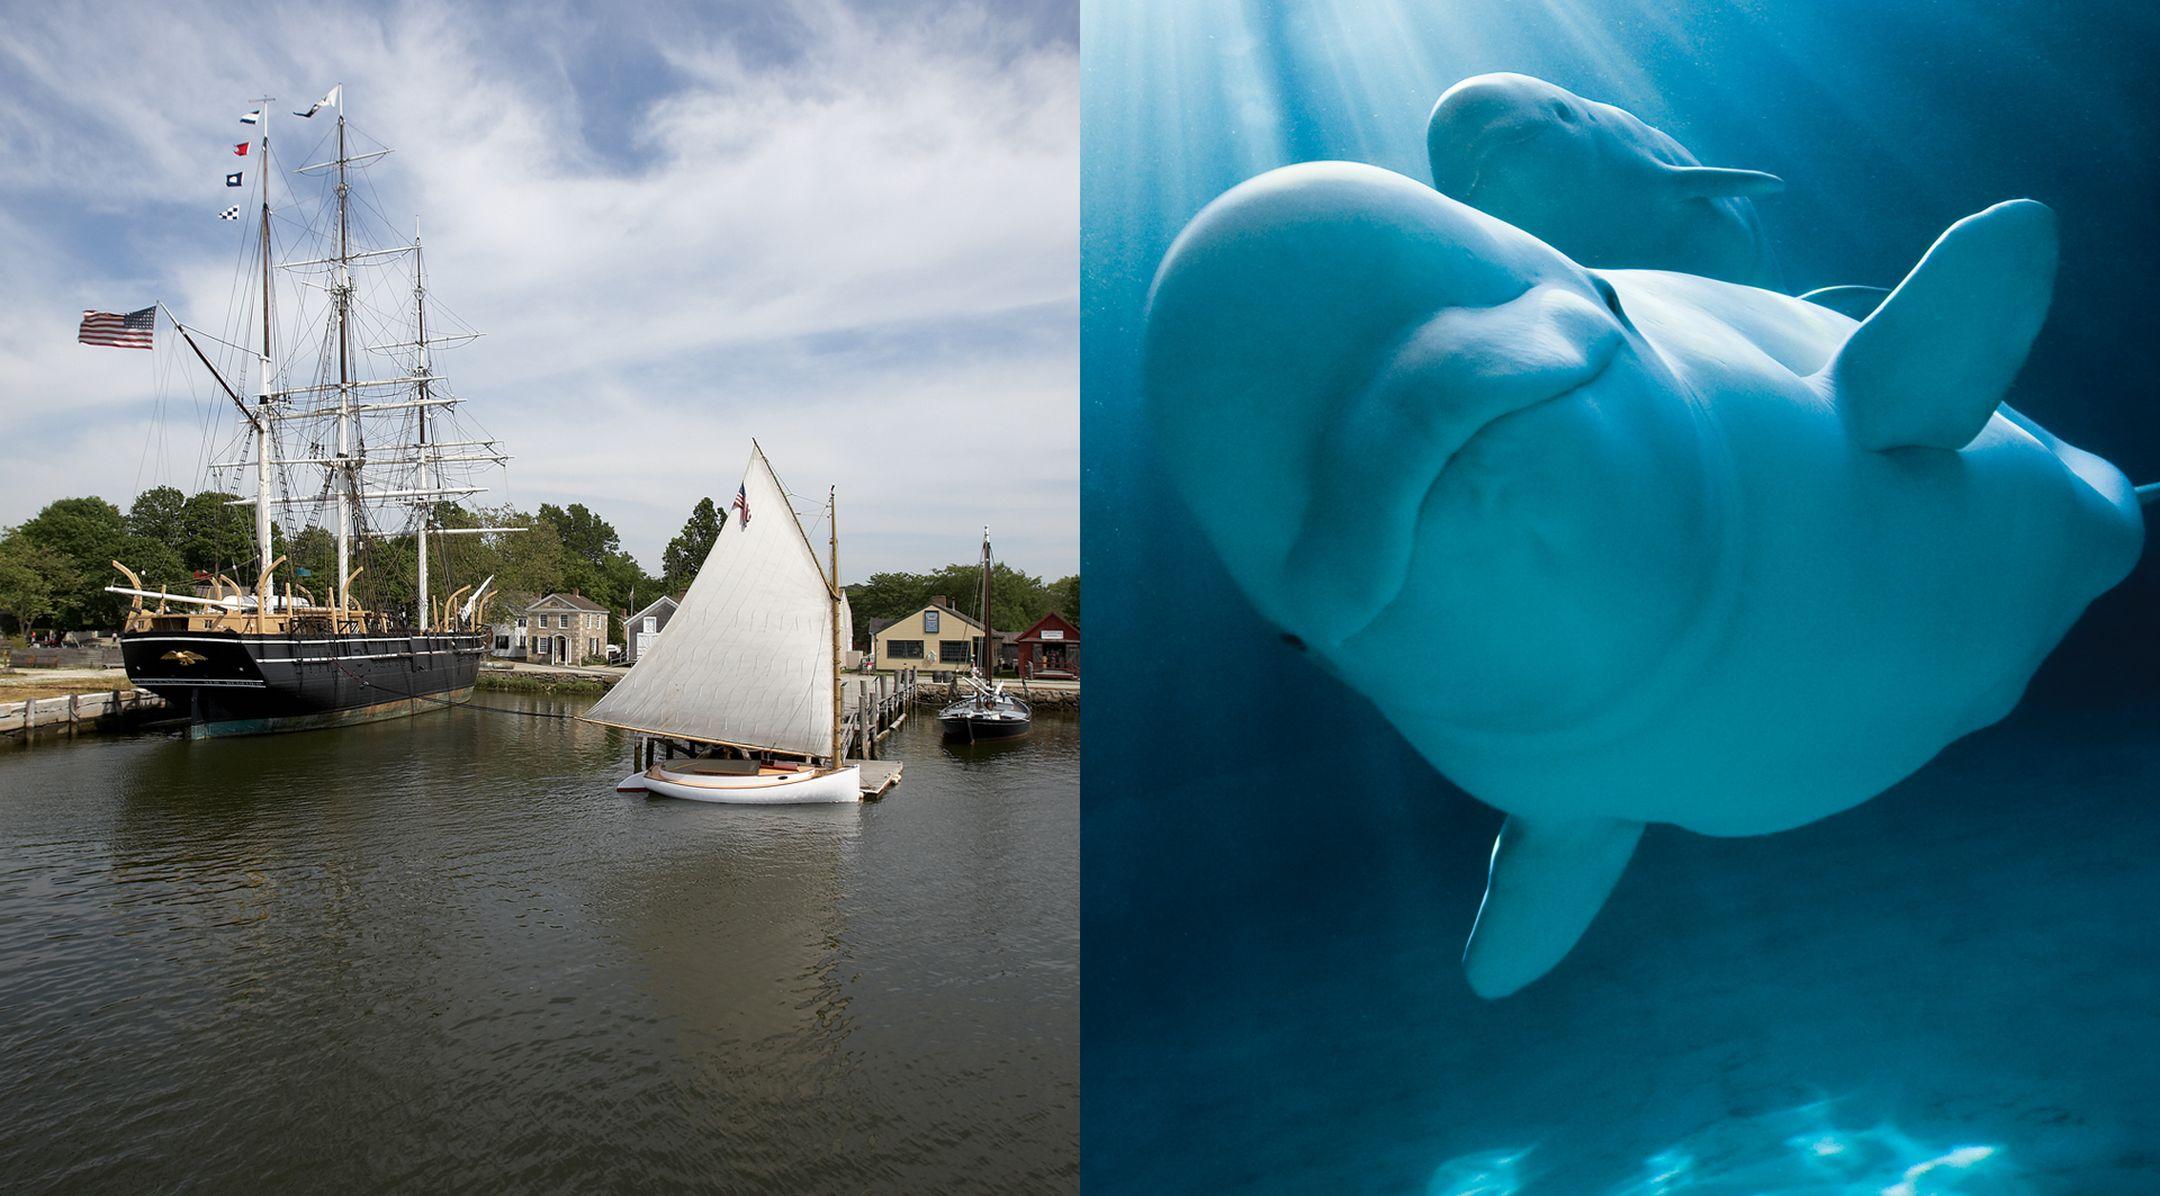 Image 1: A small harbor with a sailboat and a tall ship flying an American flag; Image 2: Two Belulga whales underwater with sunlight streaming down from above